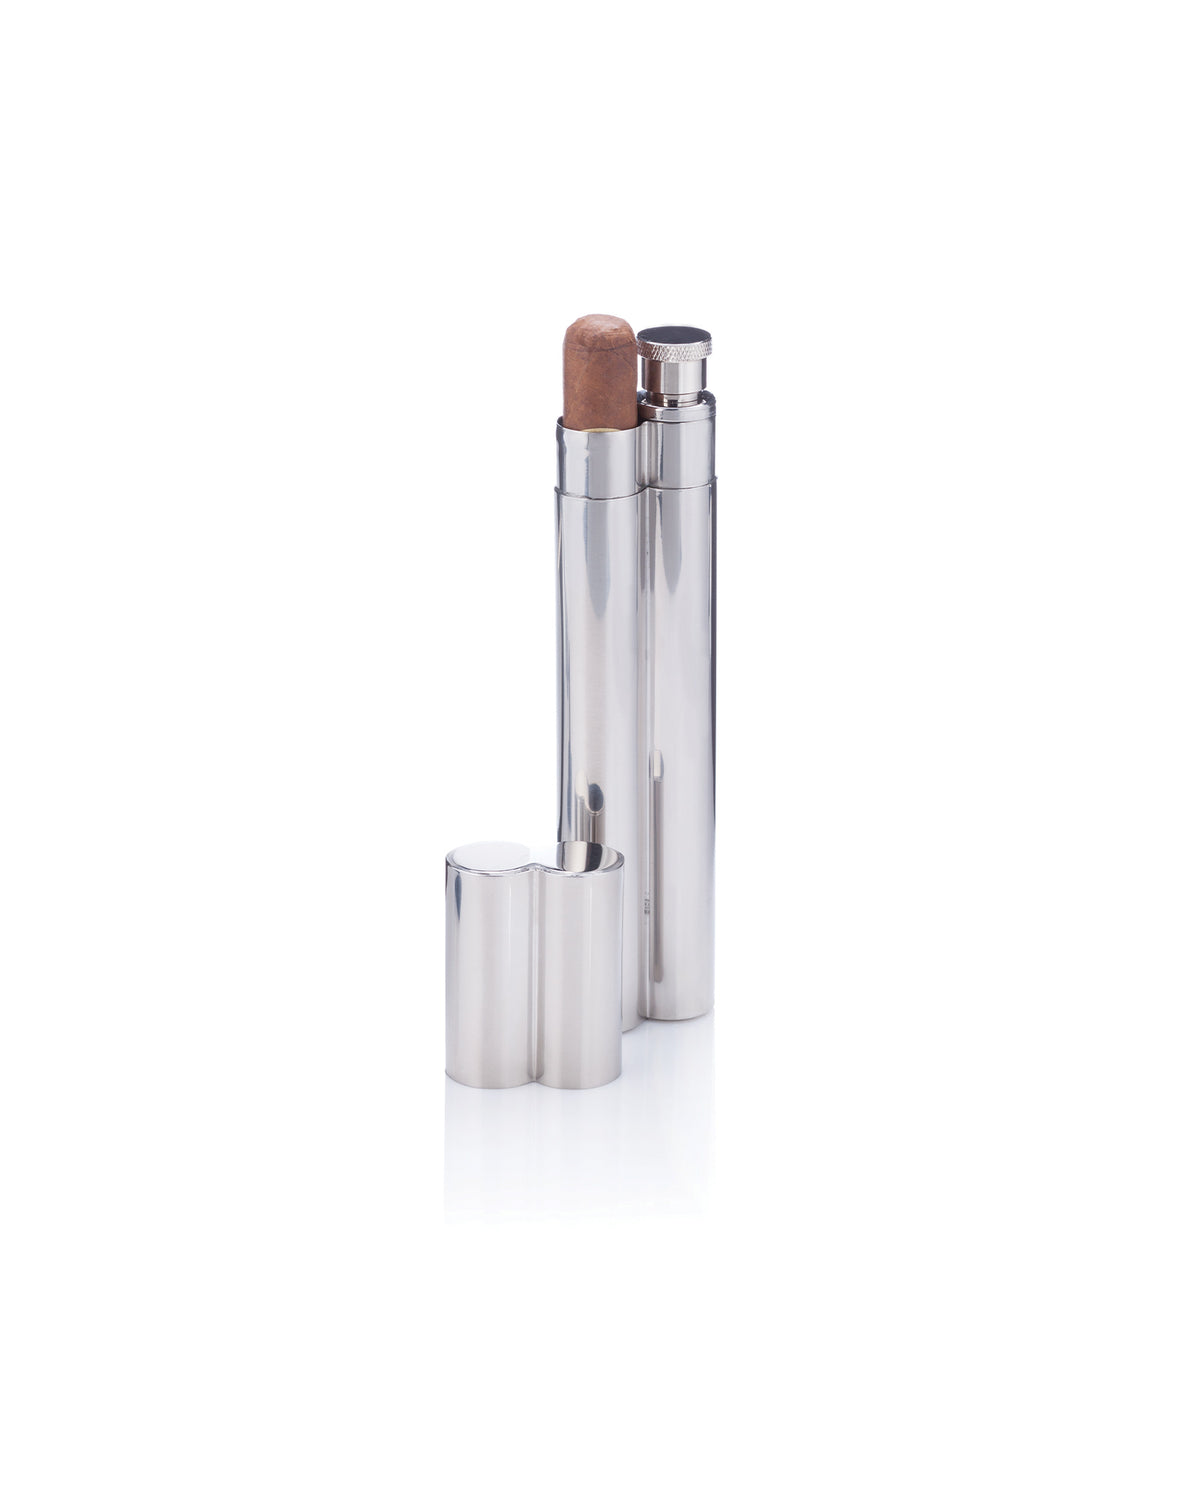 Stainless Steel Cigar Holder And 2 Oz Flask